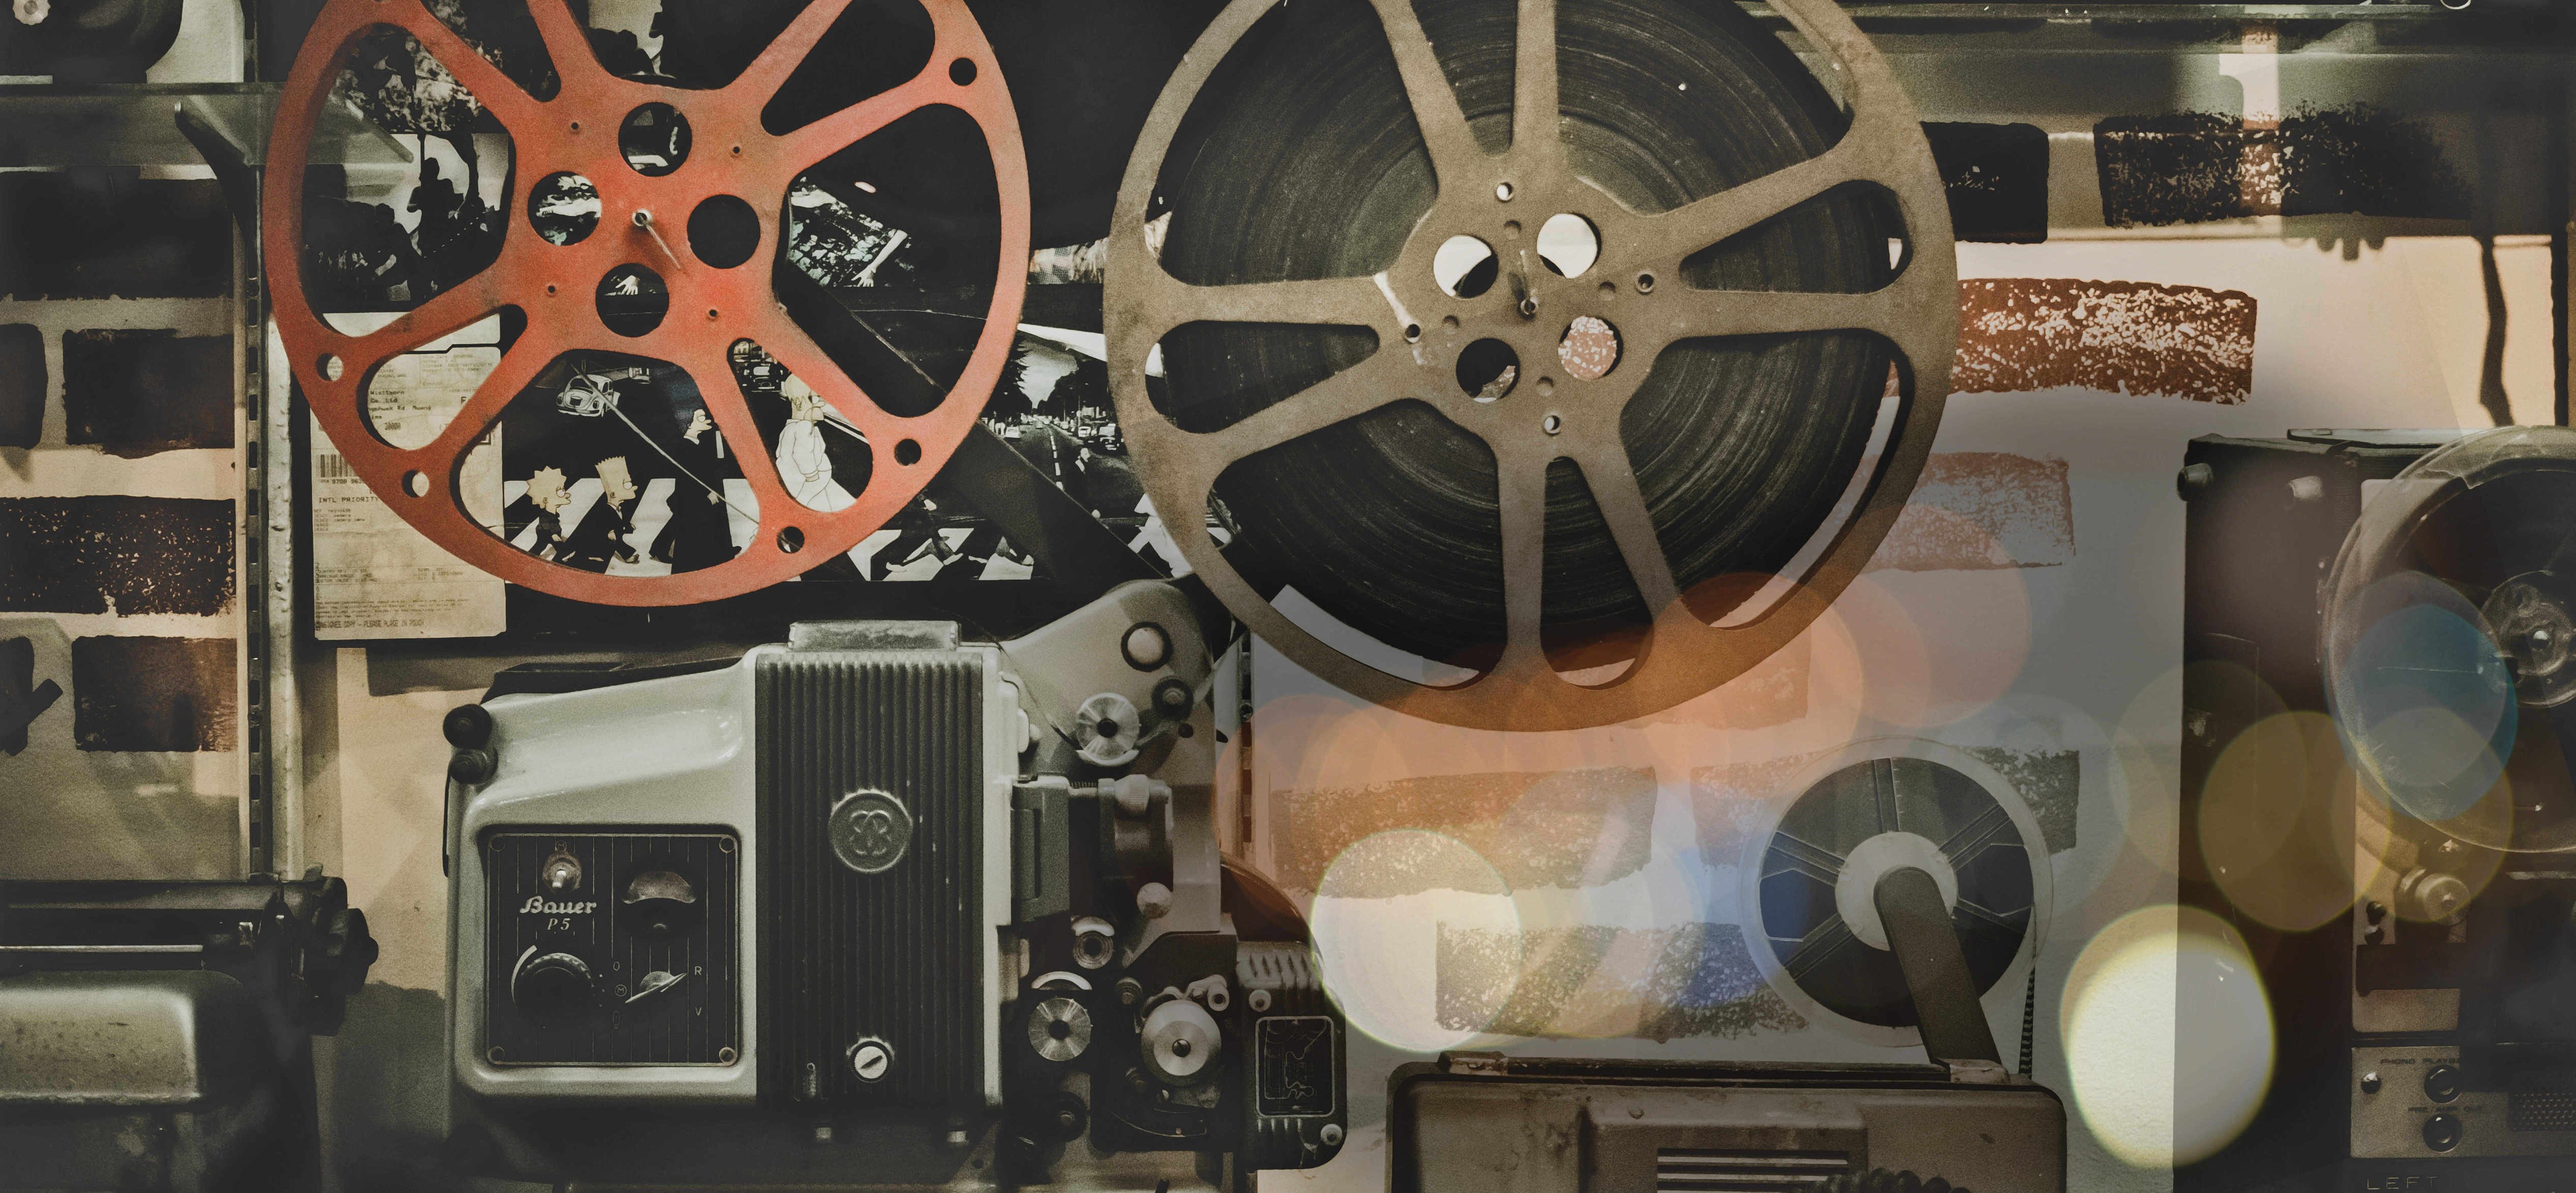 A vintage movie reel and film reel are showcased, evoking nostalgia for the golden age of cinema.